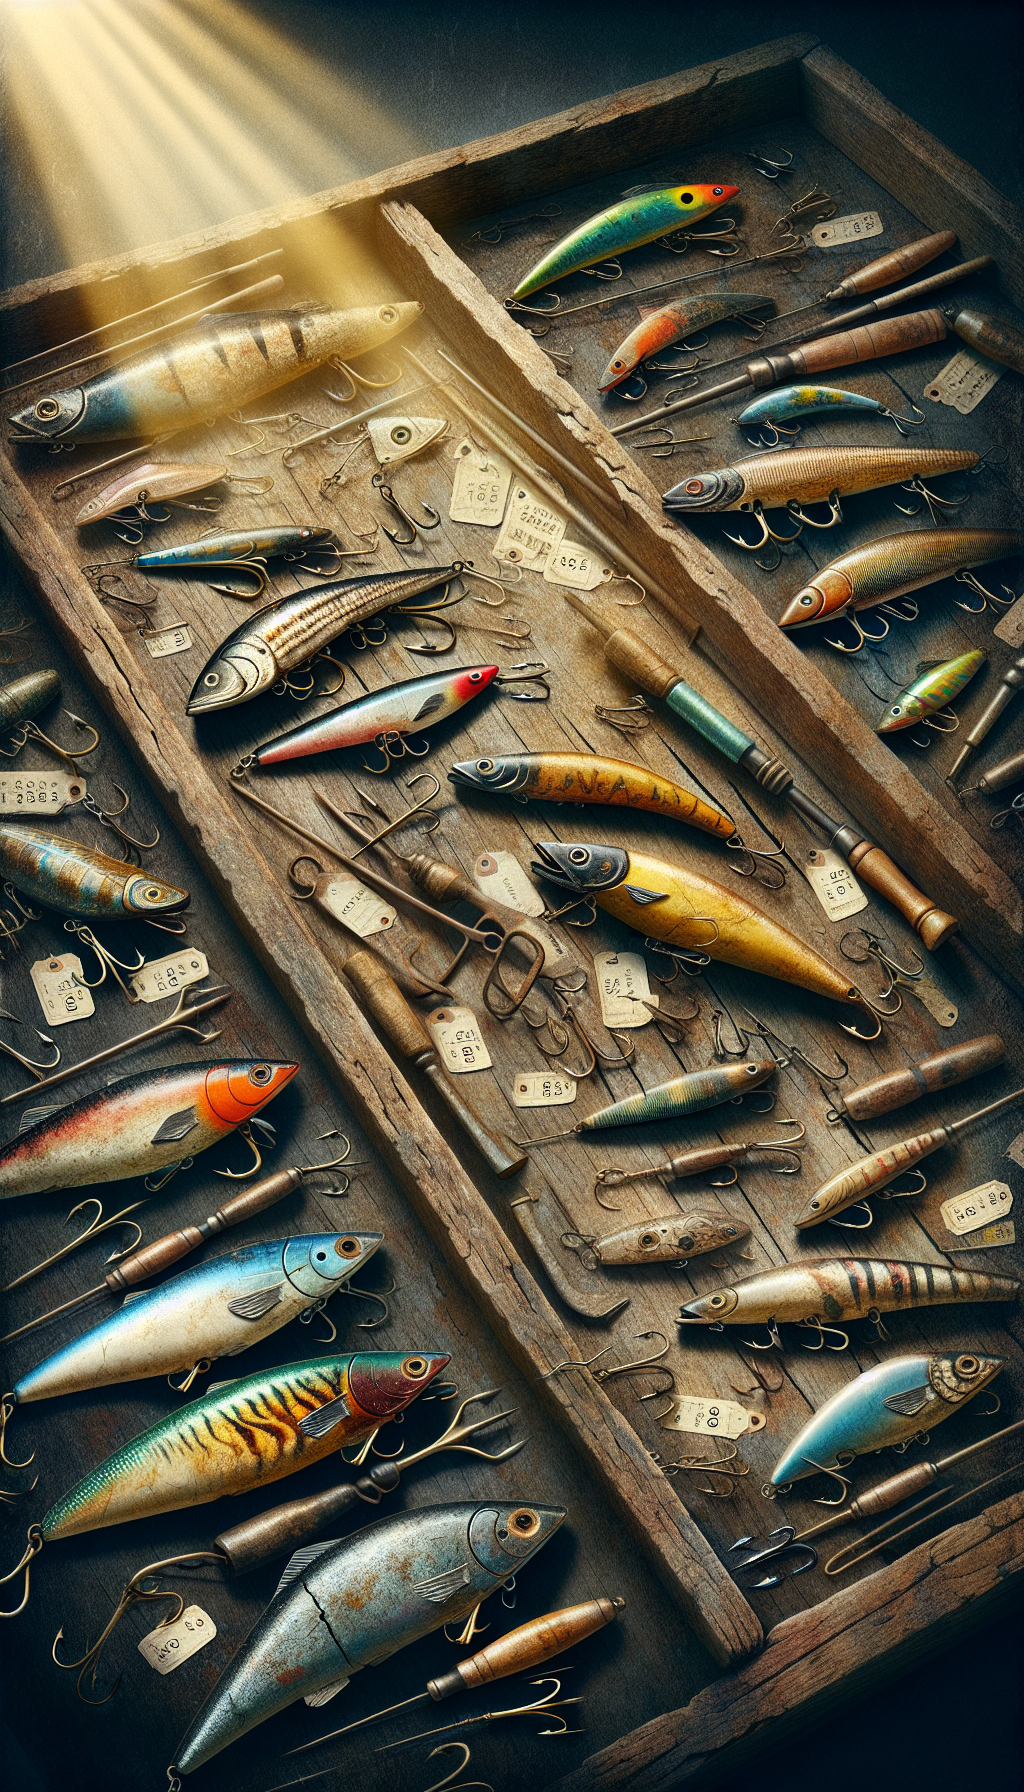 An intricate still life illustration depicts a weathered wooden workbench scattered with a variety of vintage fishing lures, each with detailed, faded paint and rusted hooks, highlighted by a golden beam of light that casts a valuation price tag shadows on the aged surface, symbolically merging the allure of the past with their current treasured worth.